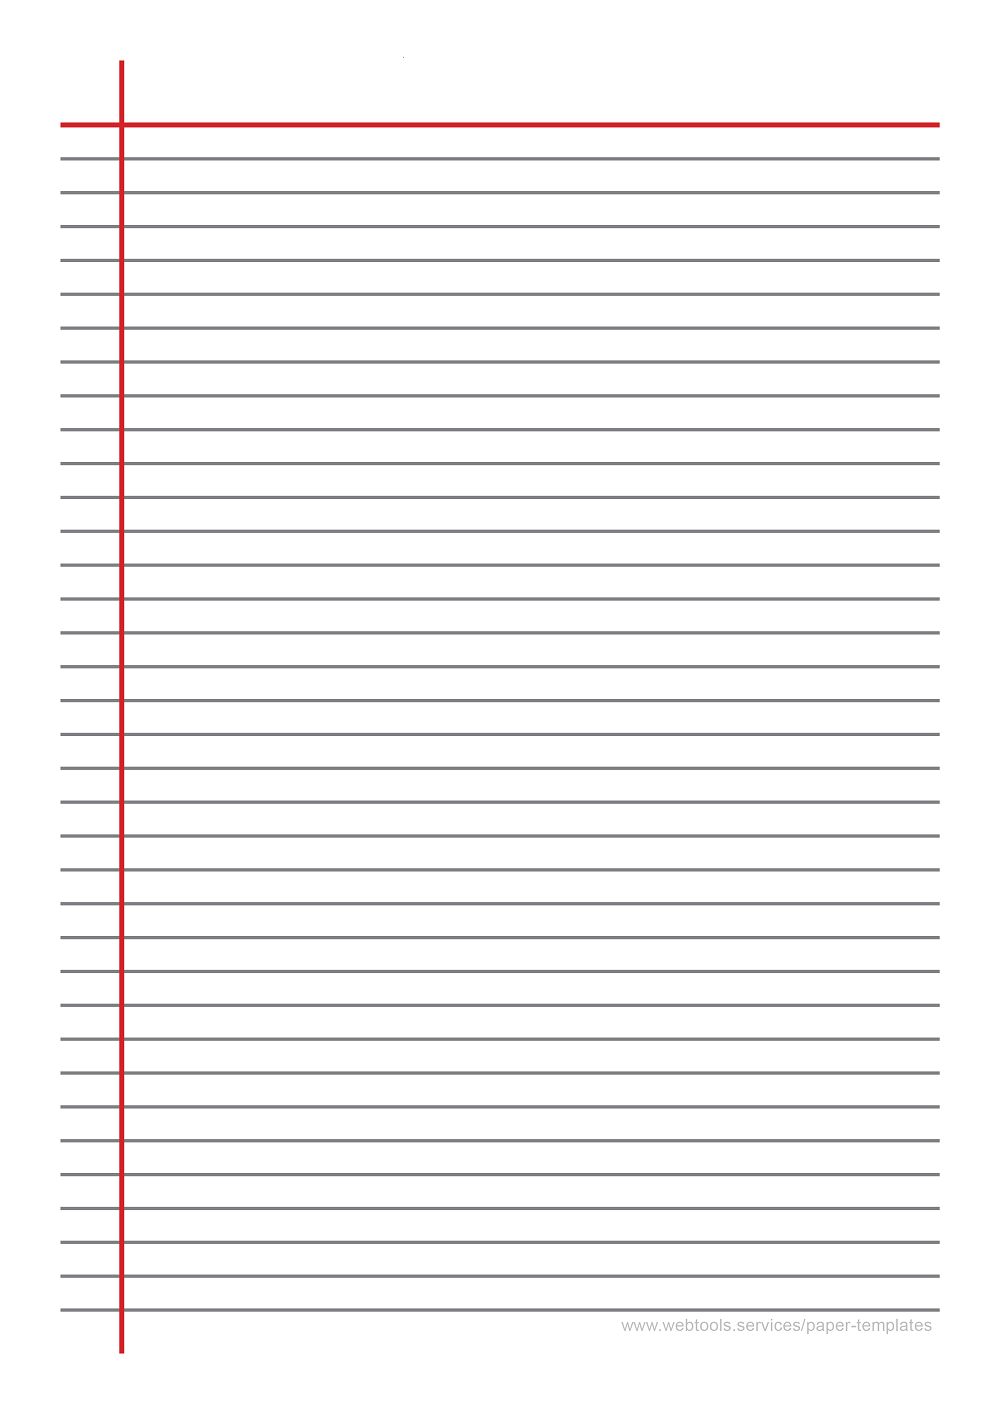 7_1mm Black Line Ruled Paper With Horizontal And Vertical Margins